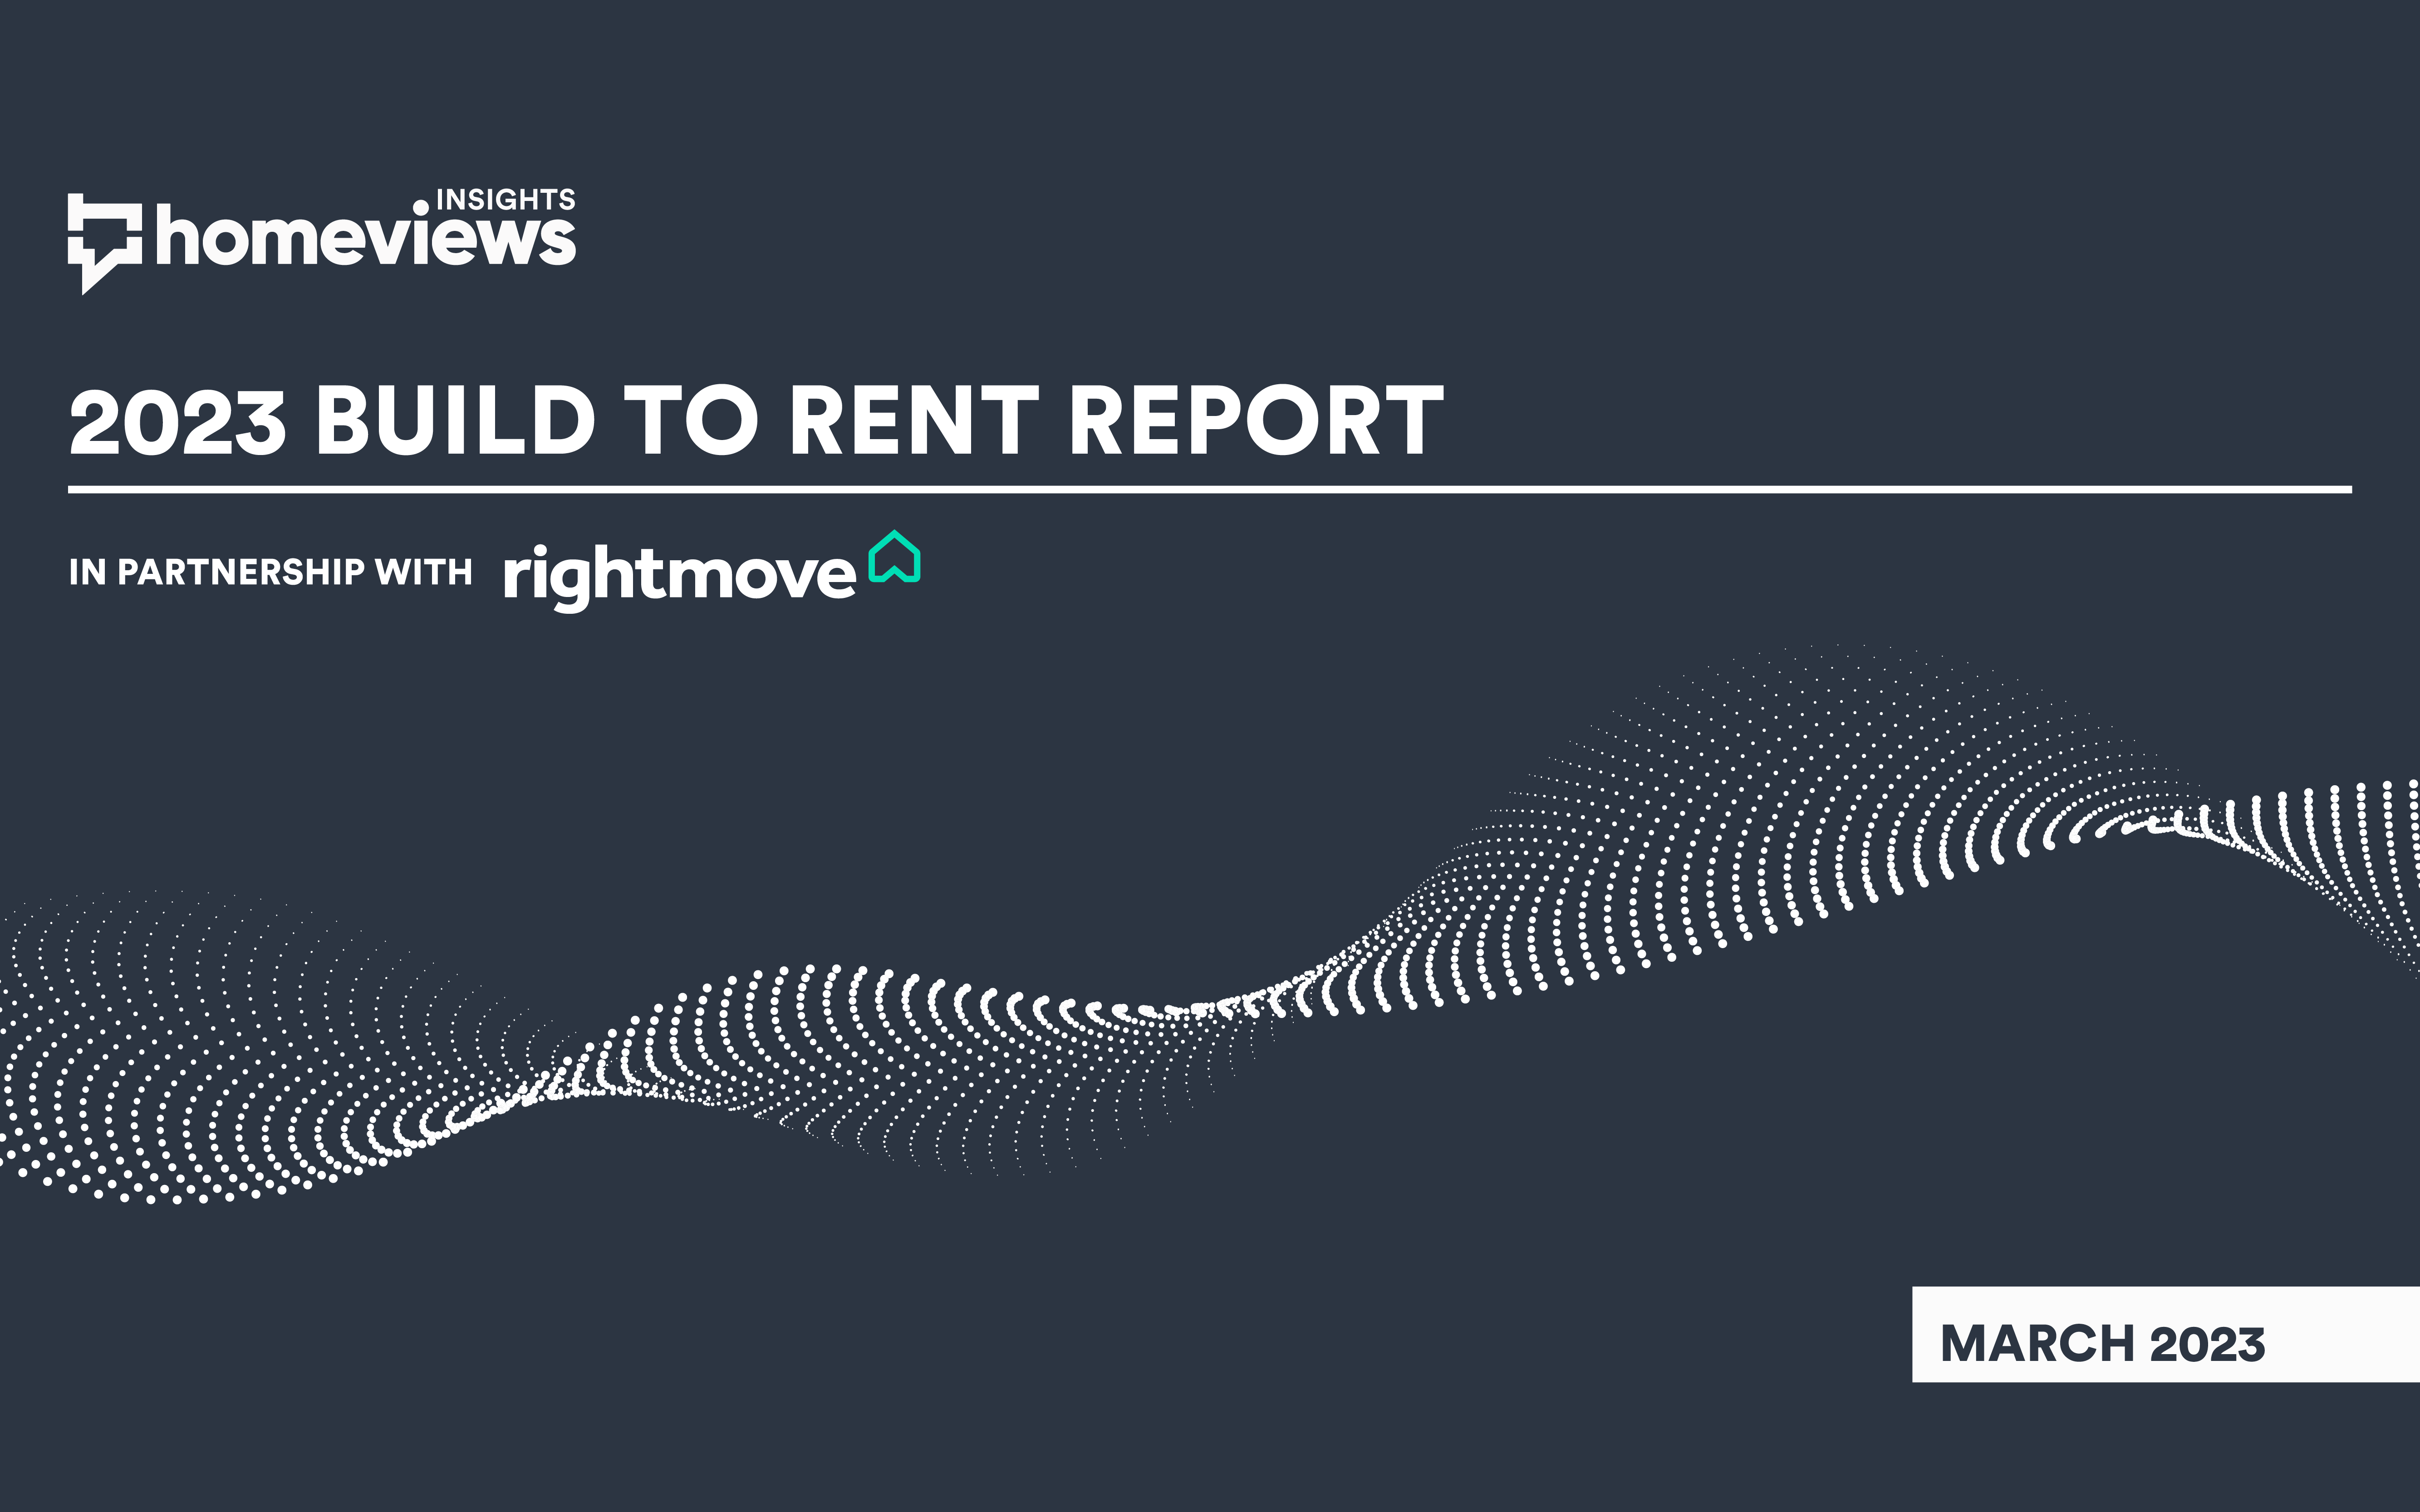 HomeViews Build to Rent Report 2023